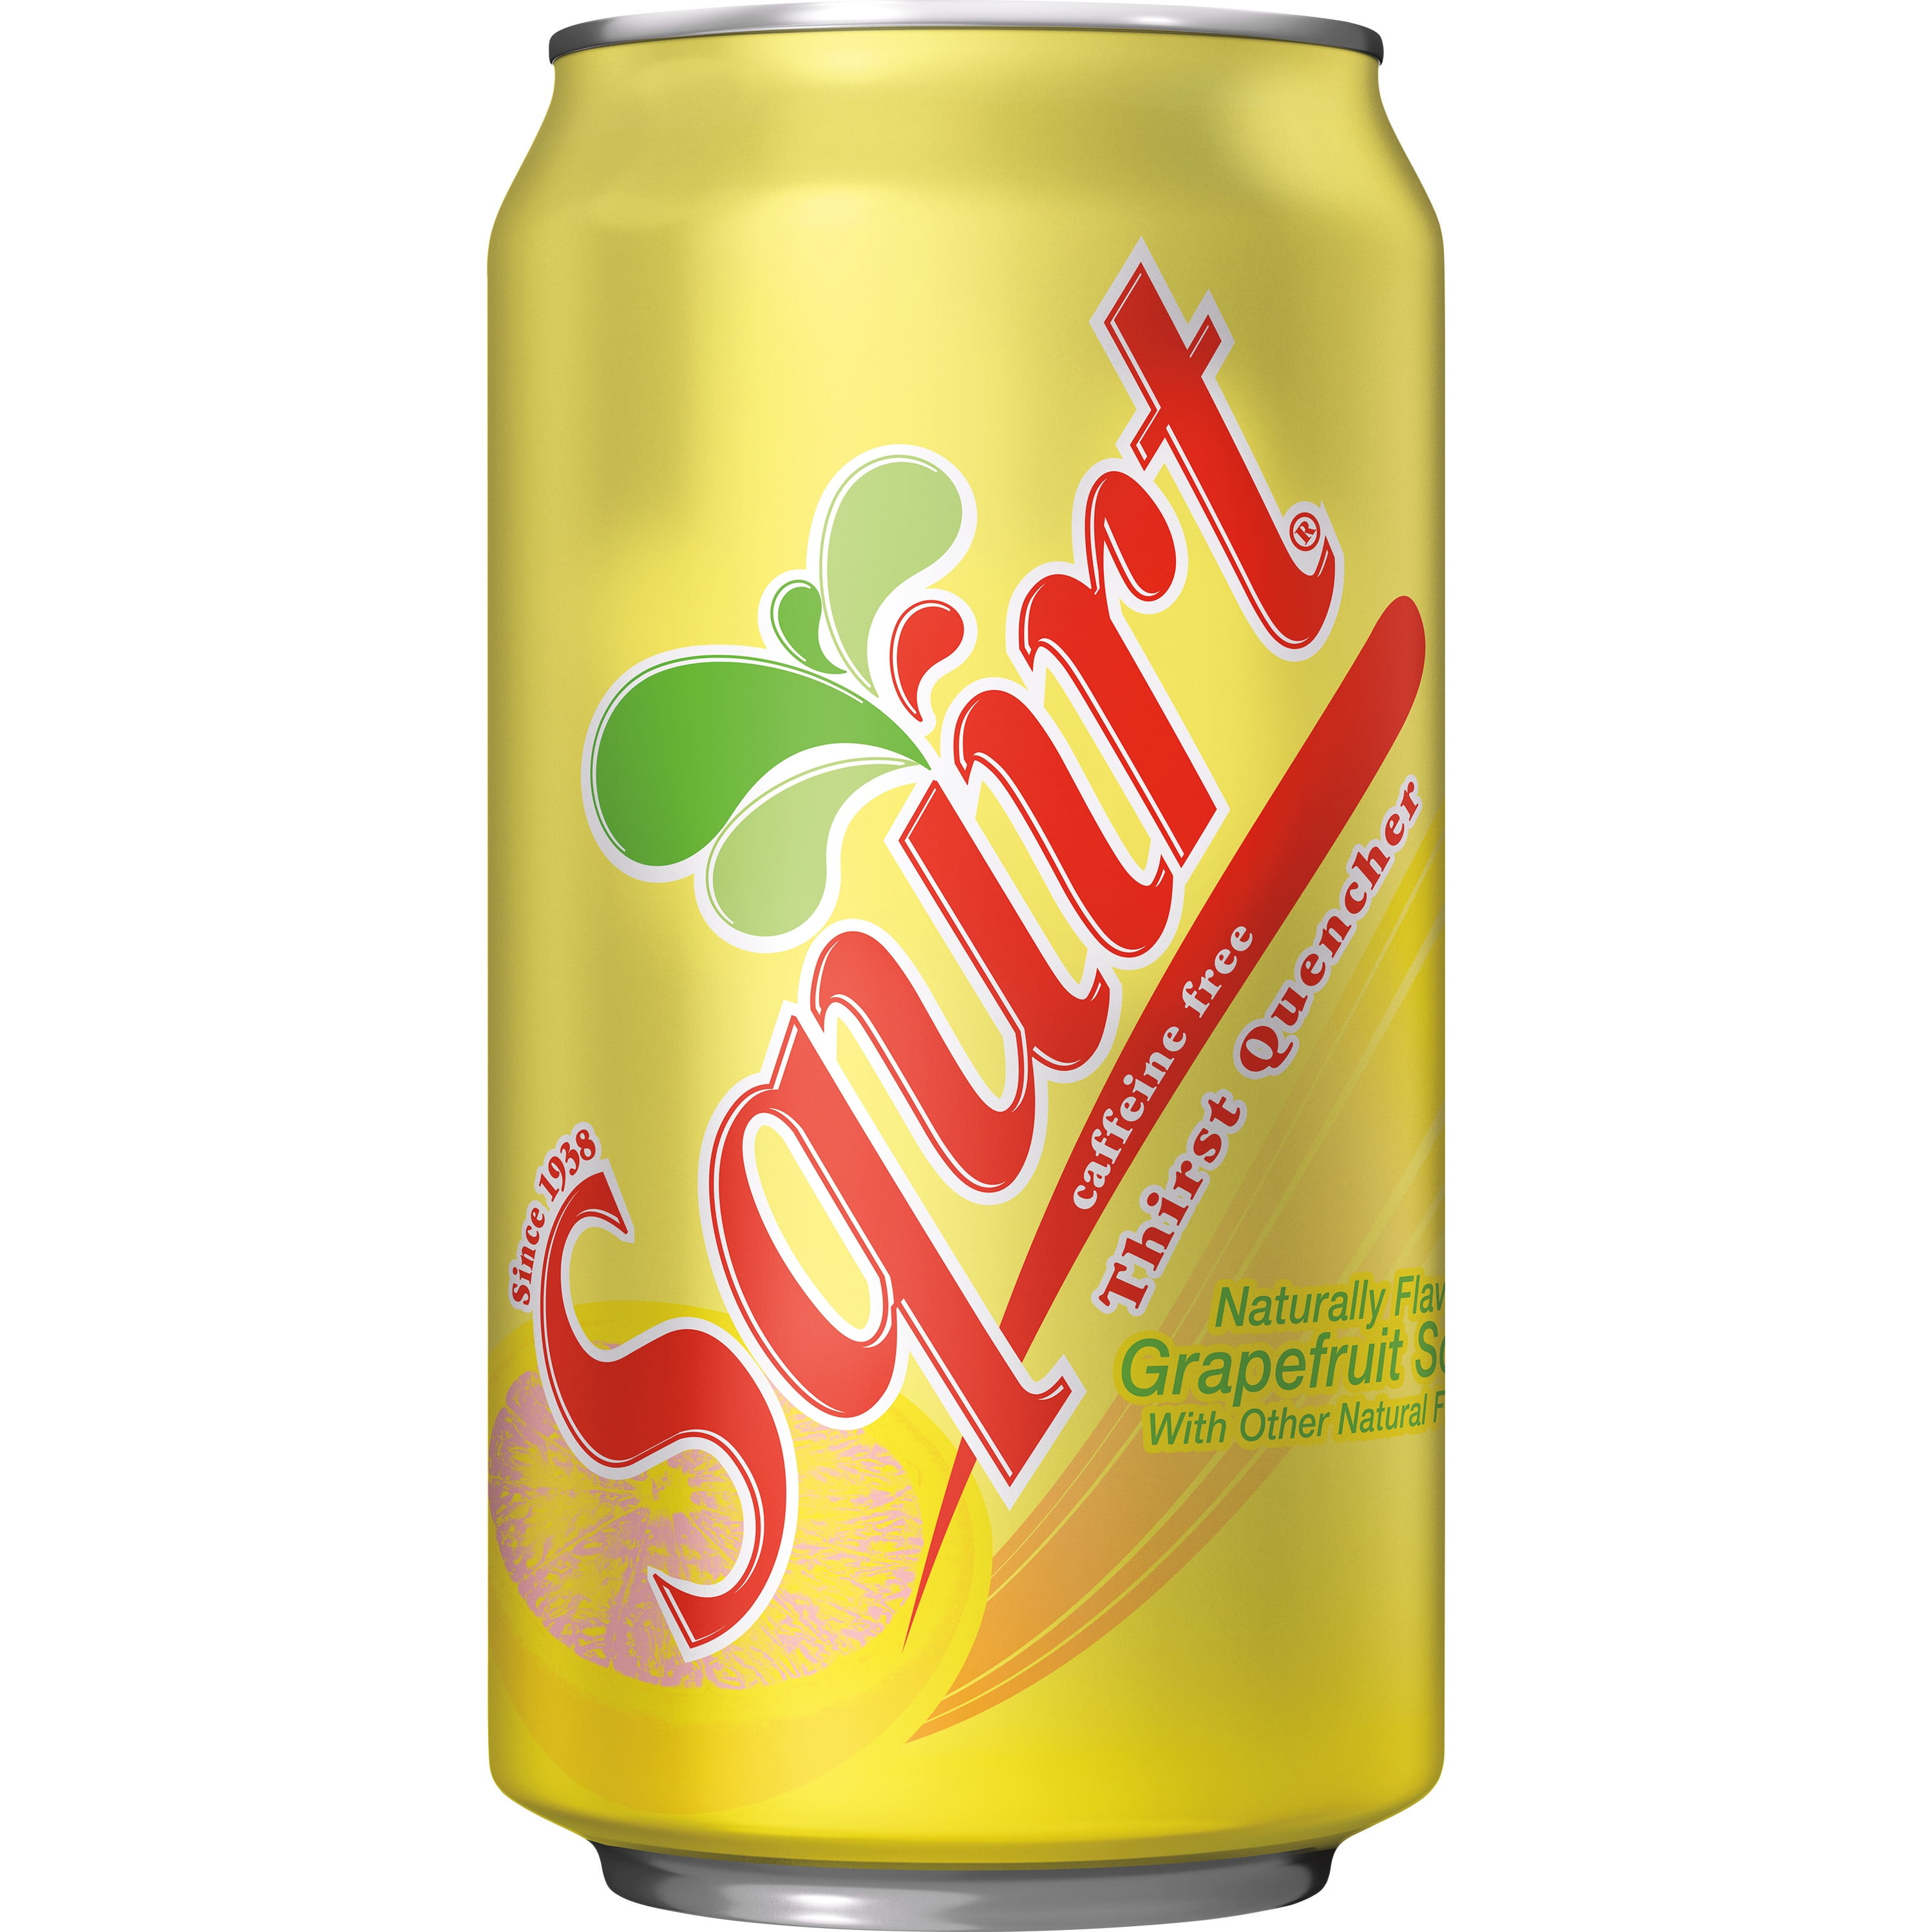 Squirt cocktails